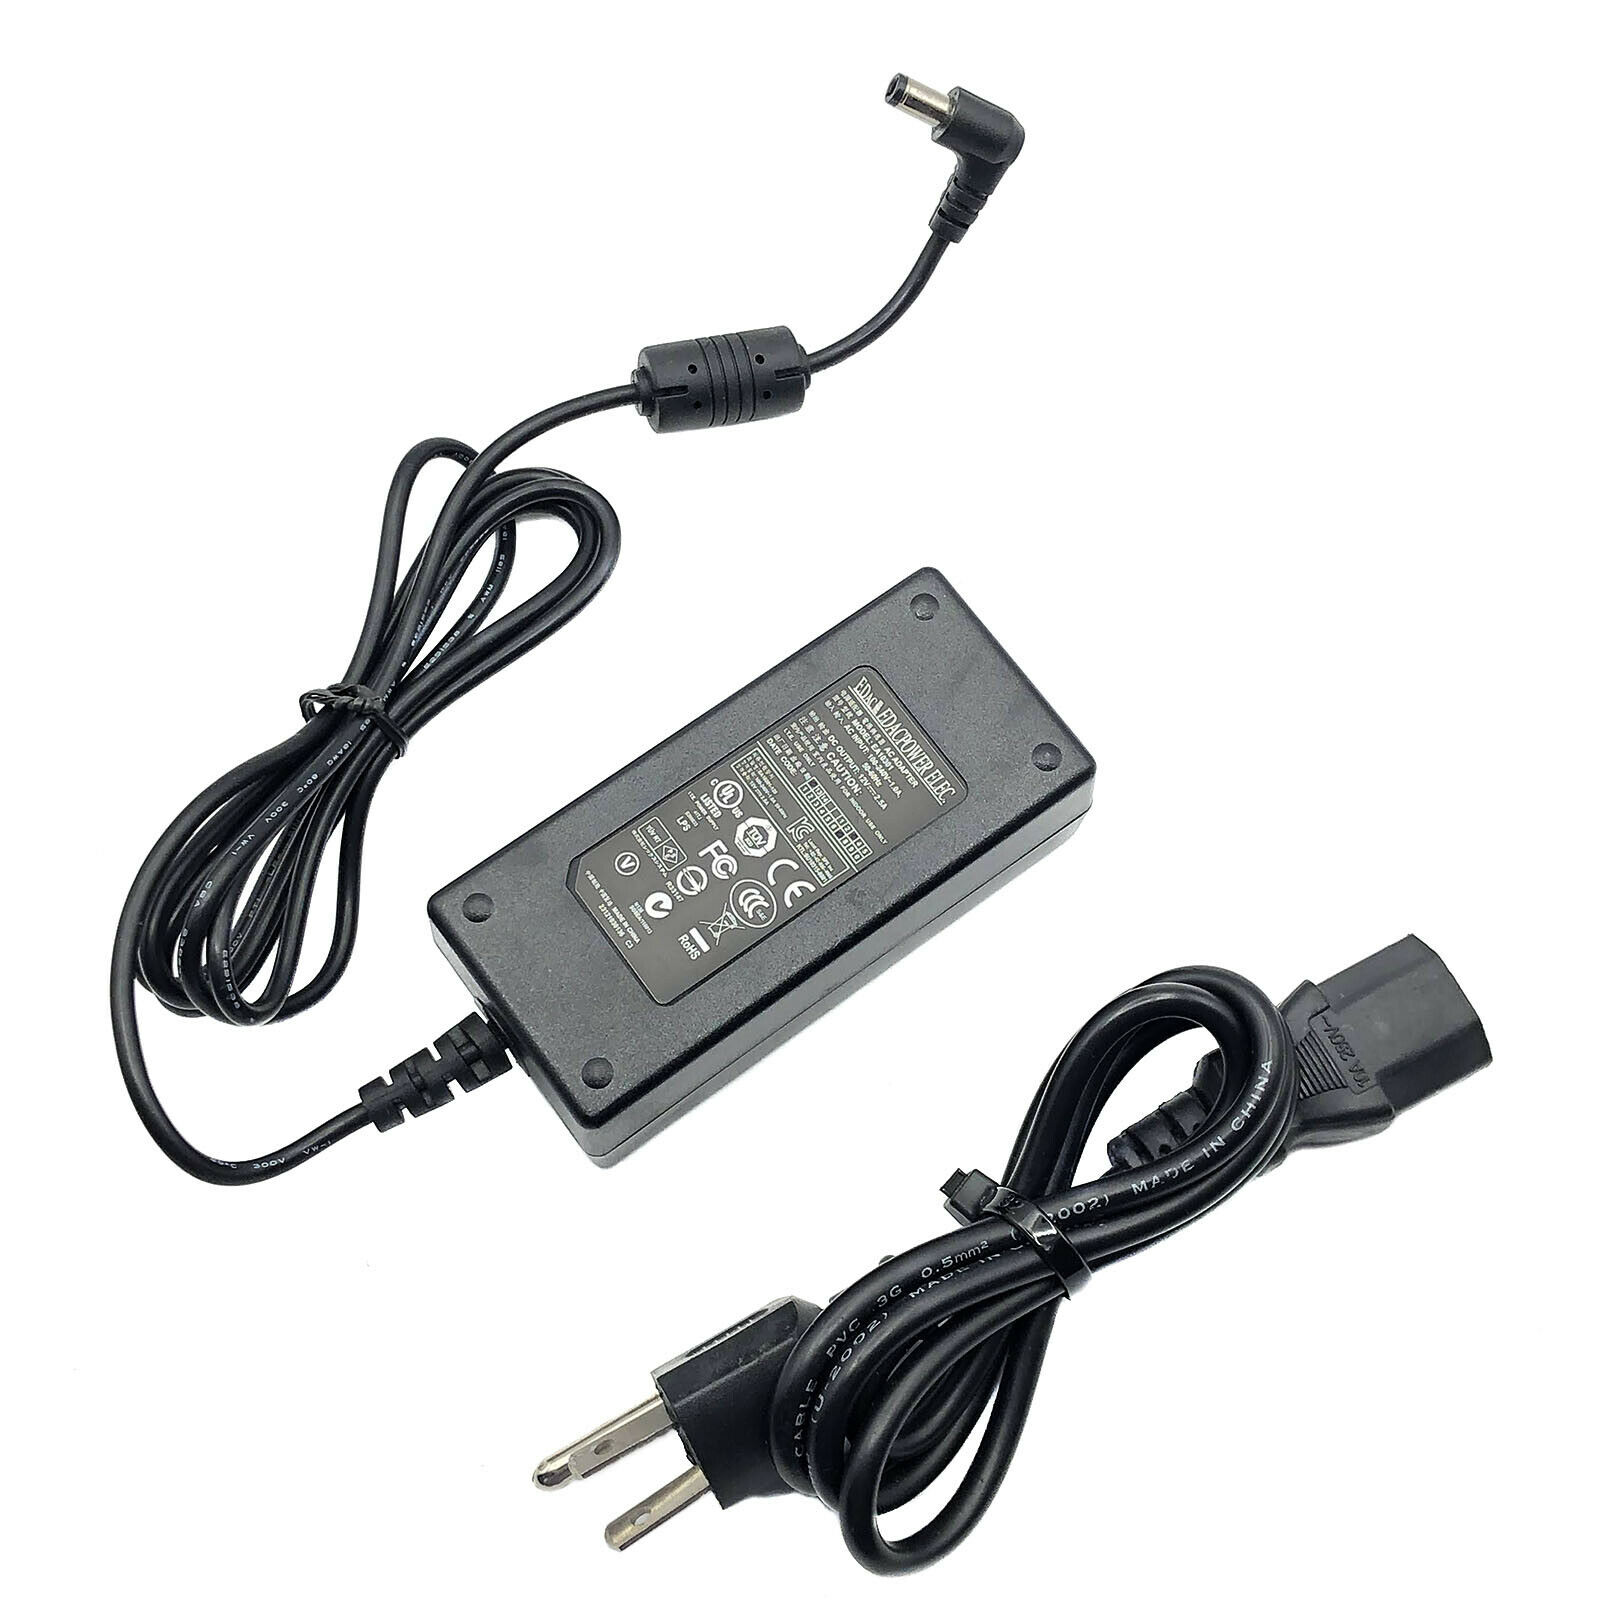 Genuine AC Adapter Edac for Yamaha Piano Keyboard PSR/PDX/PA/P - Series w/Cord Compatible Brand: For Yamaha Connectio - Click Image to Close